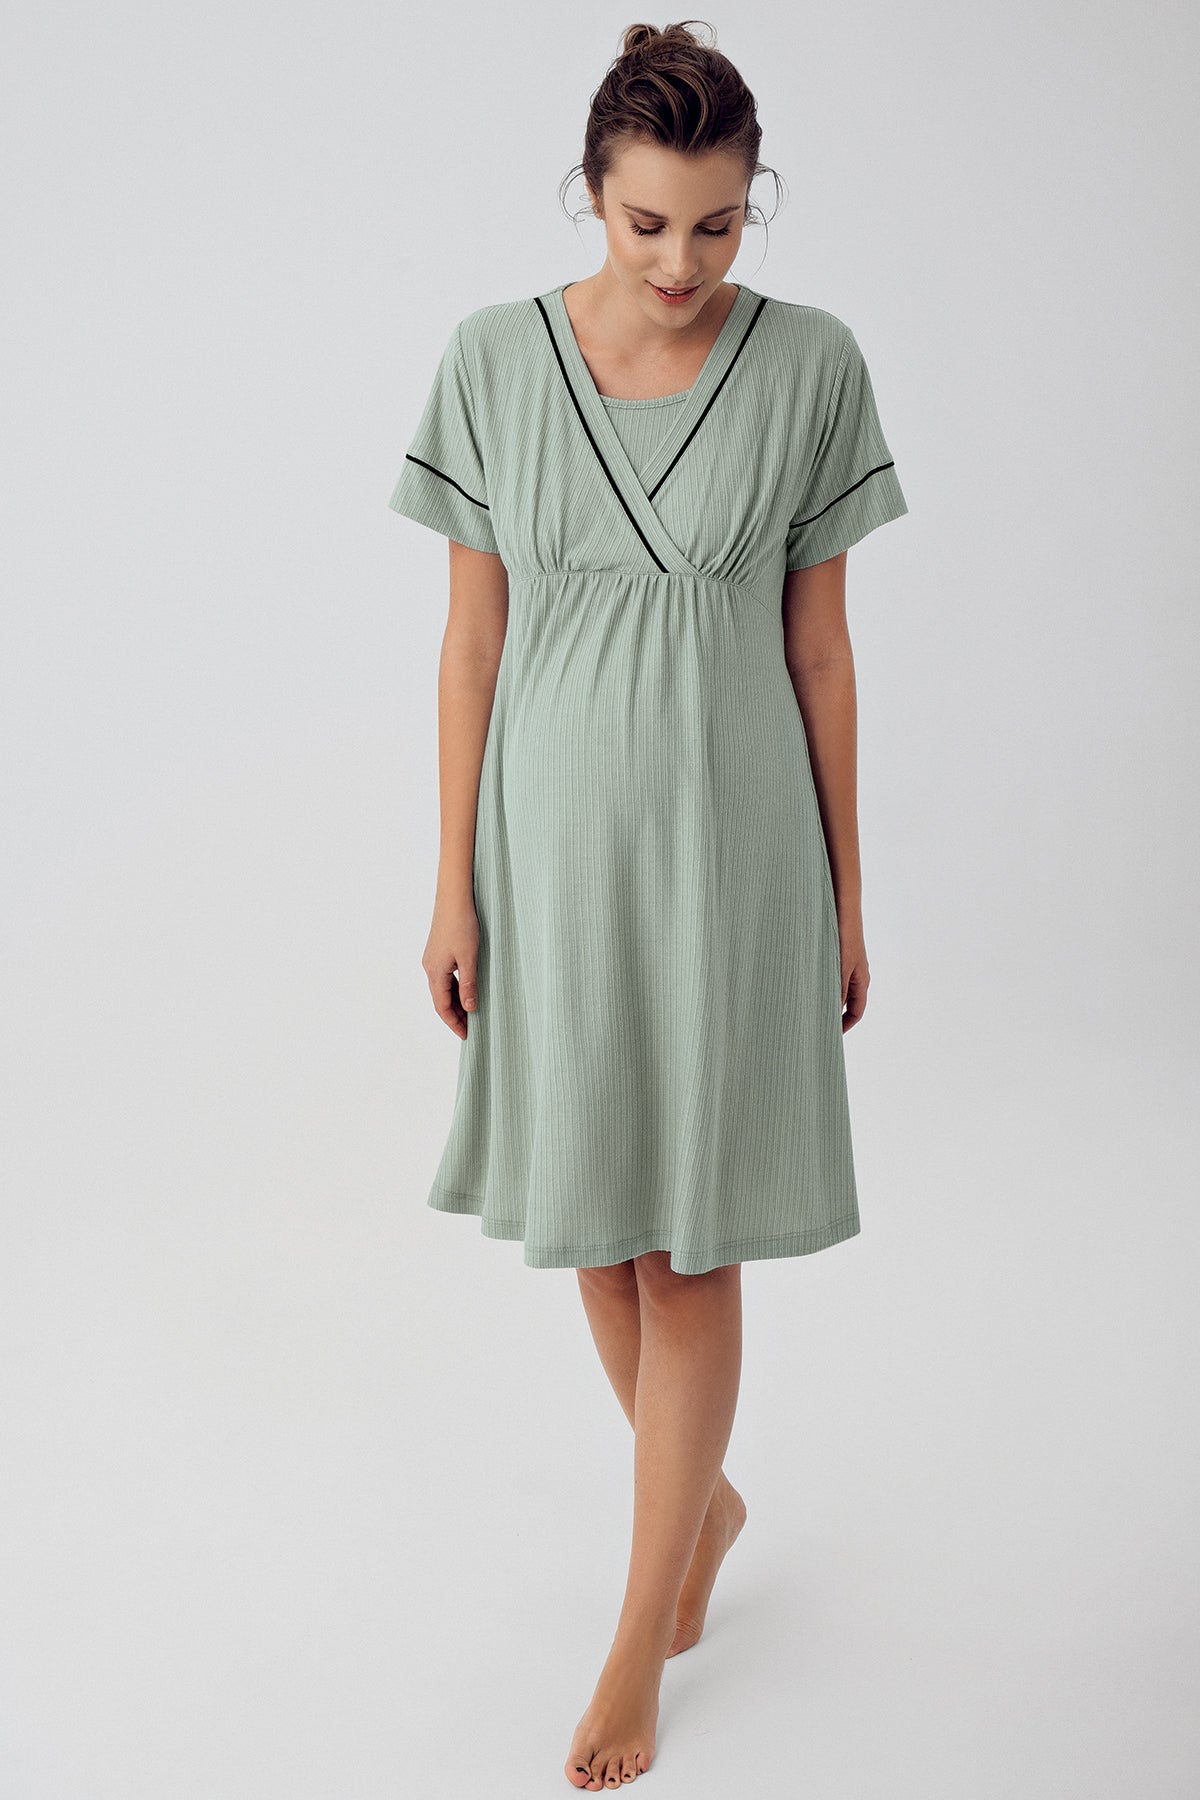 Shopymommy 16102 Double Breasted Maternity & Nursing Nightgown Green